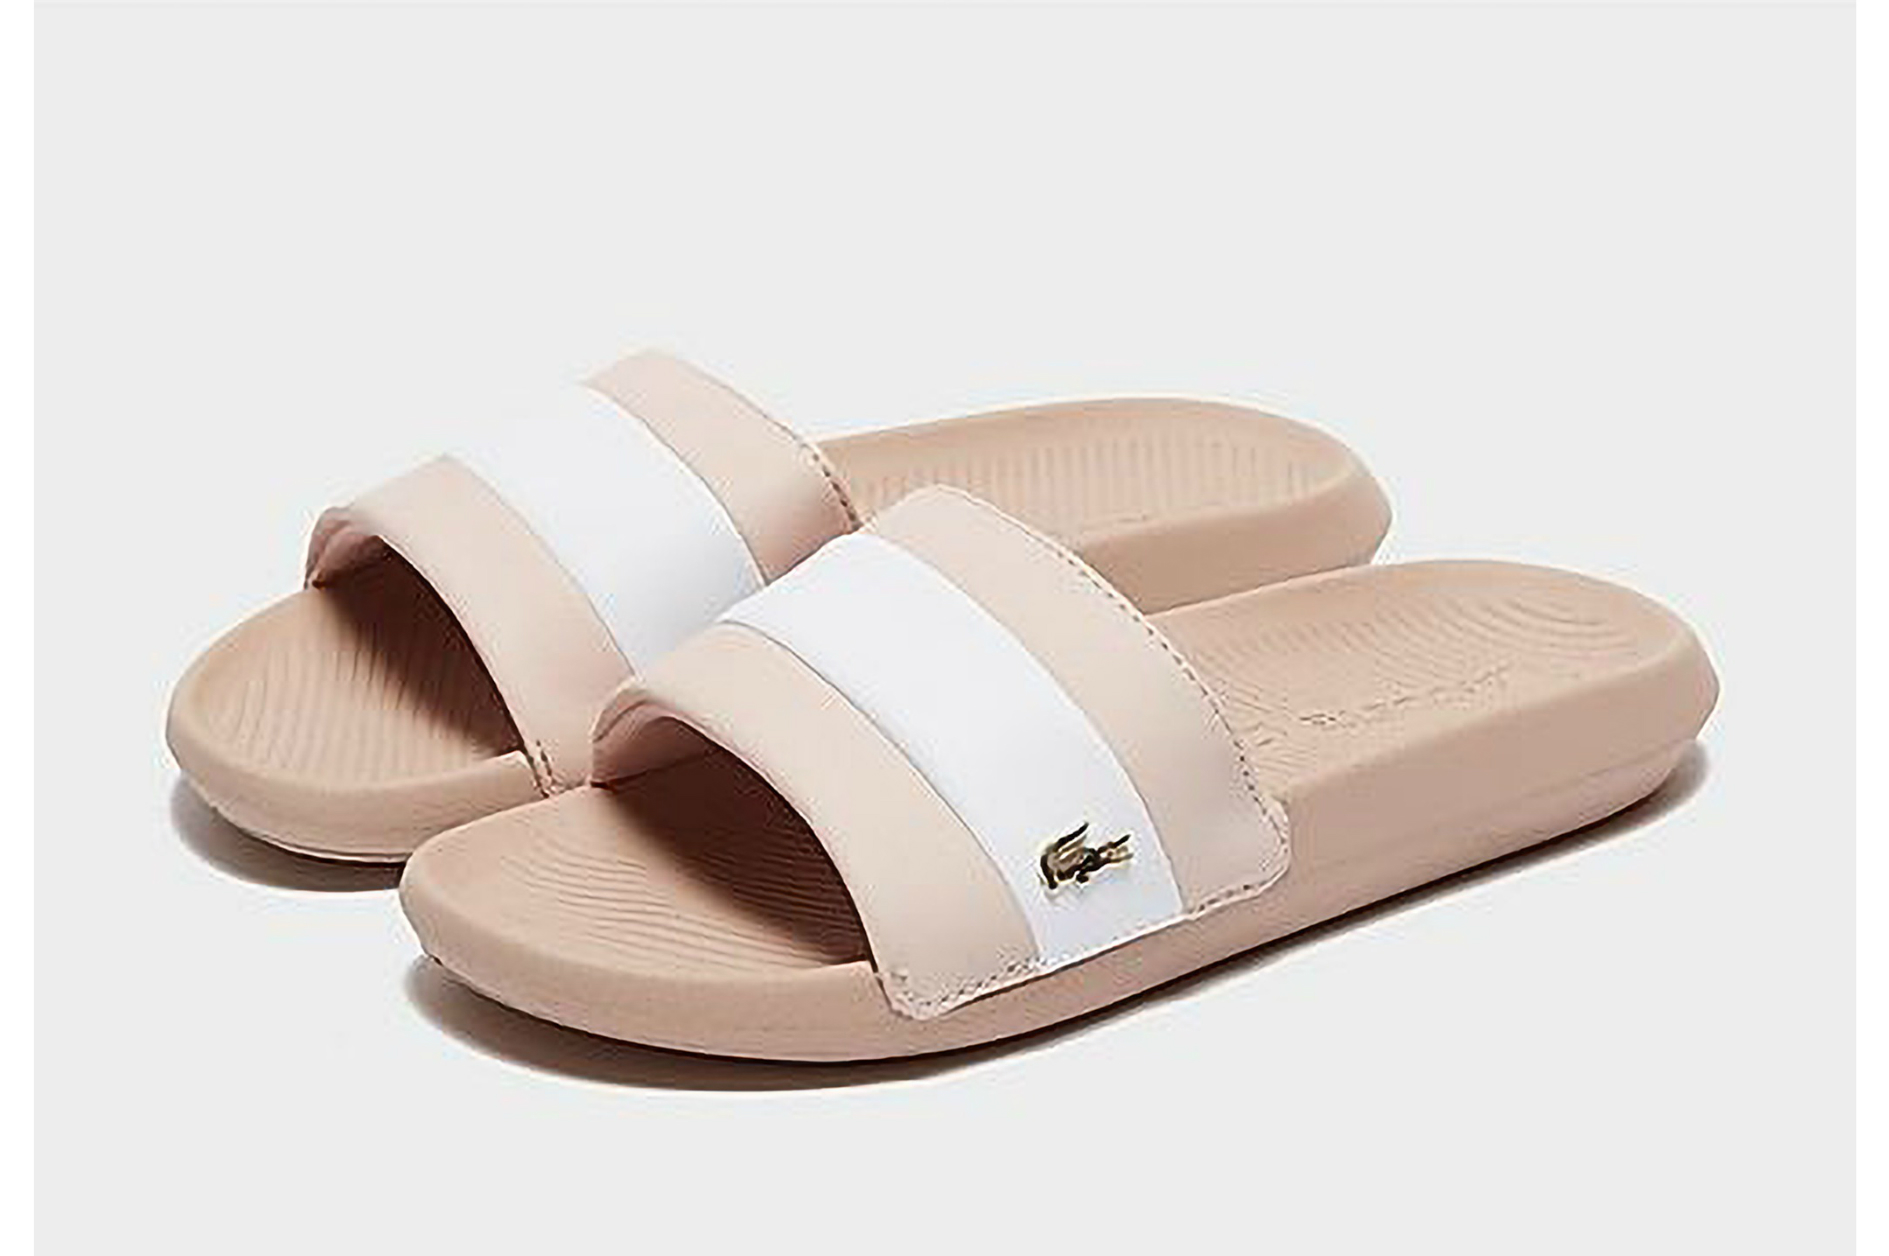 Lacoste Croco Slides (mulher)__PVP 45€